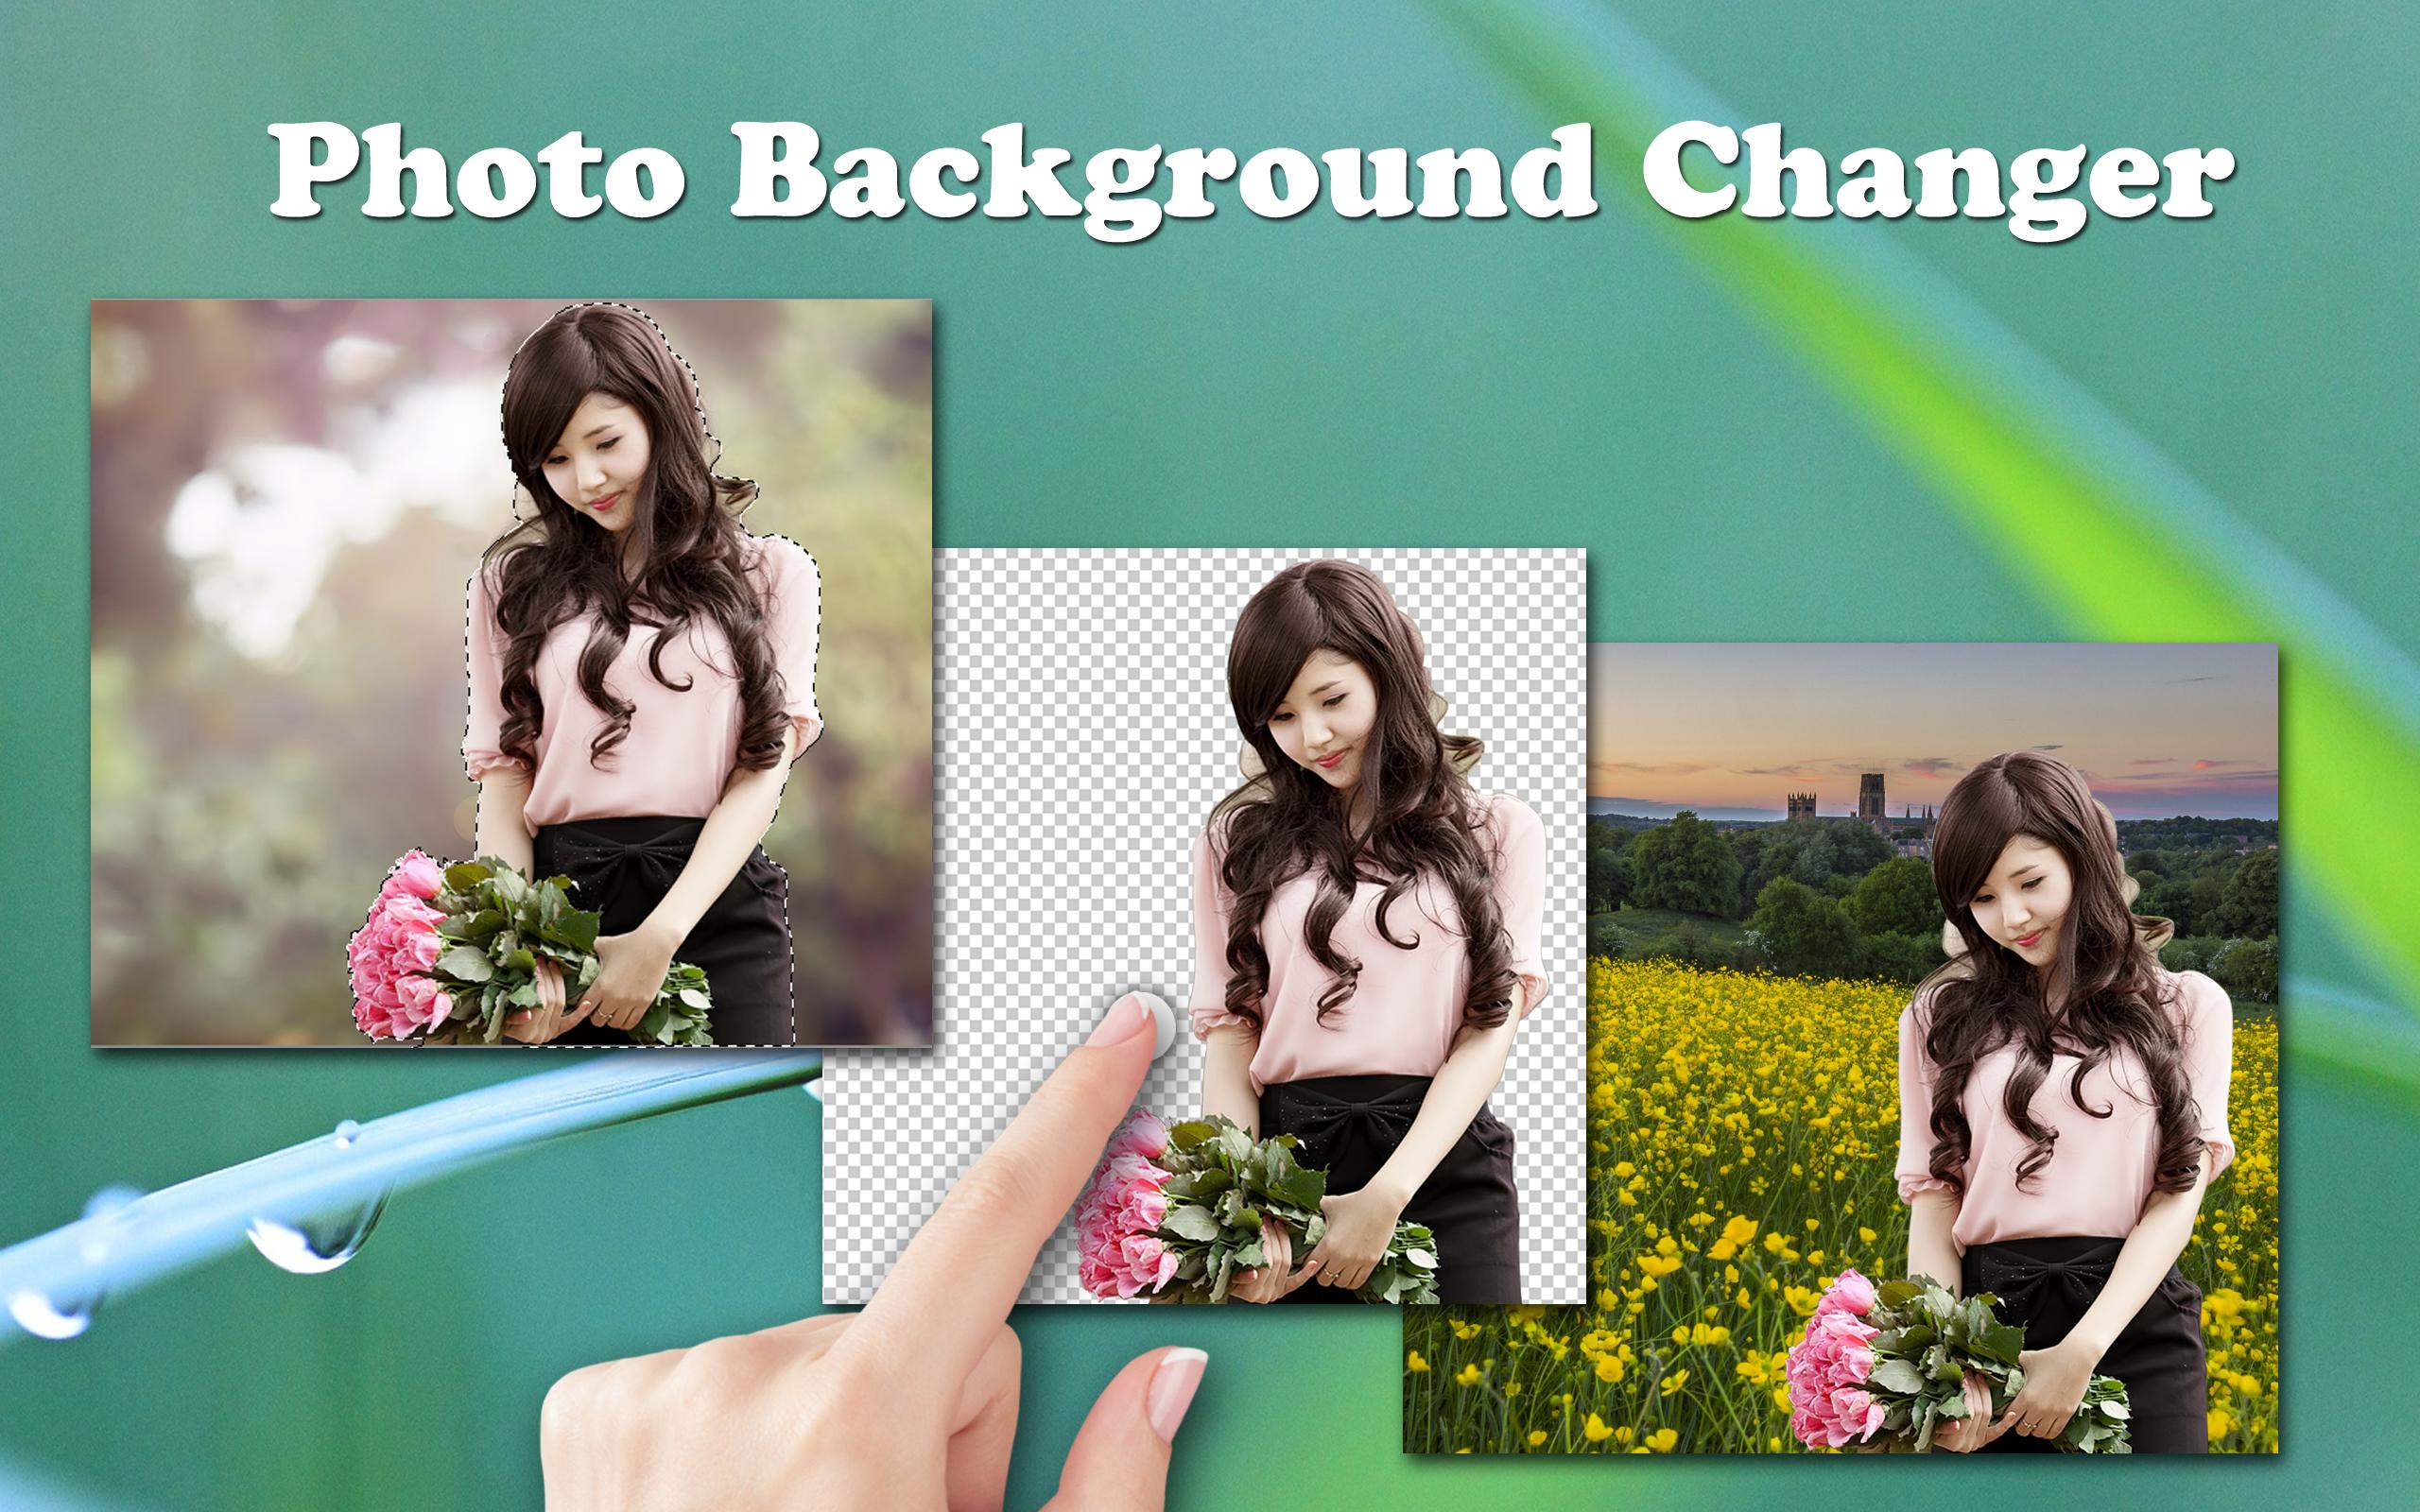 Photo Background Changer for Android - APK Download